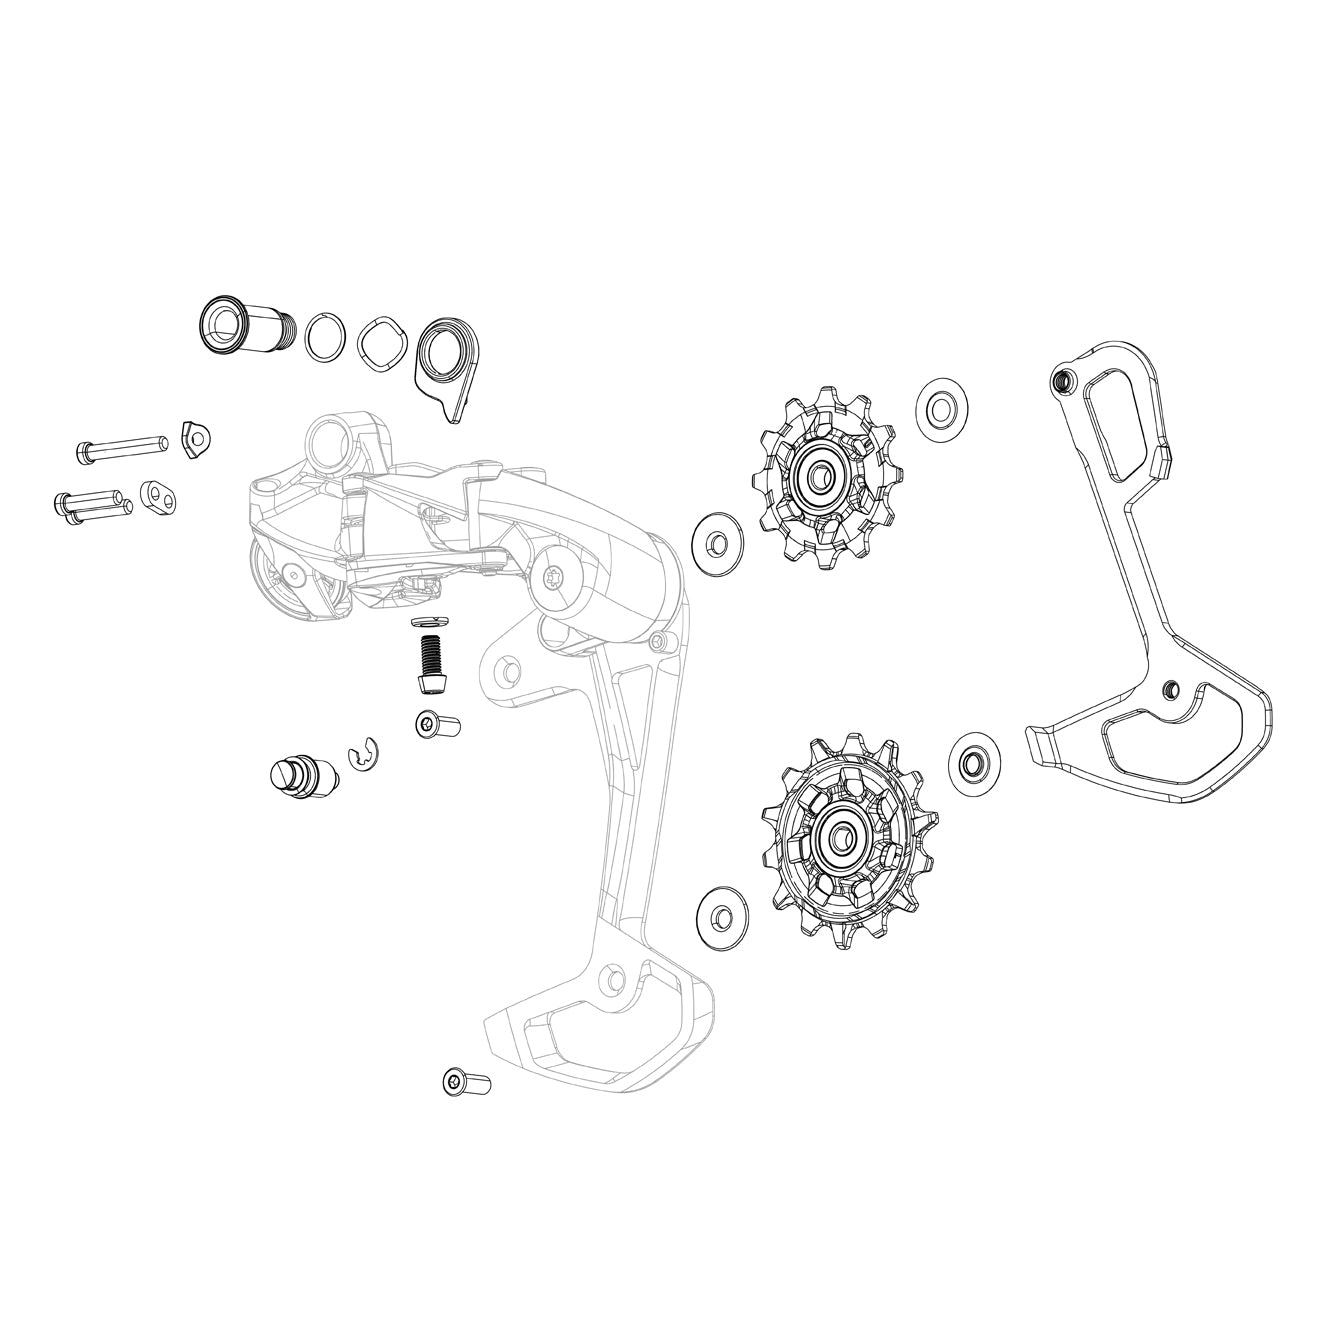 SRAM Rear Derailleur Pulley Kit X0 Eagle T-Type AXS (Includes 14T Upper And 16T Spider Pulley, 2 Stainless Steel Pulley Screws)